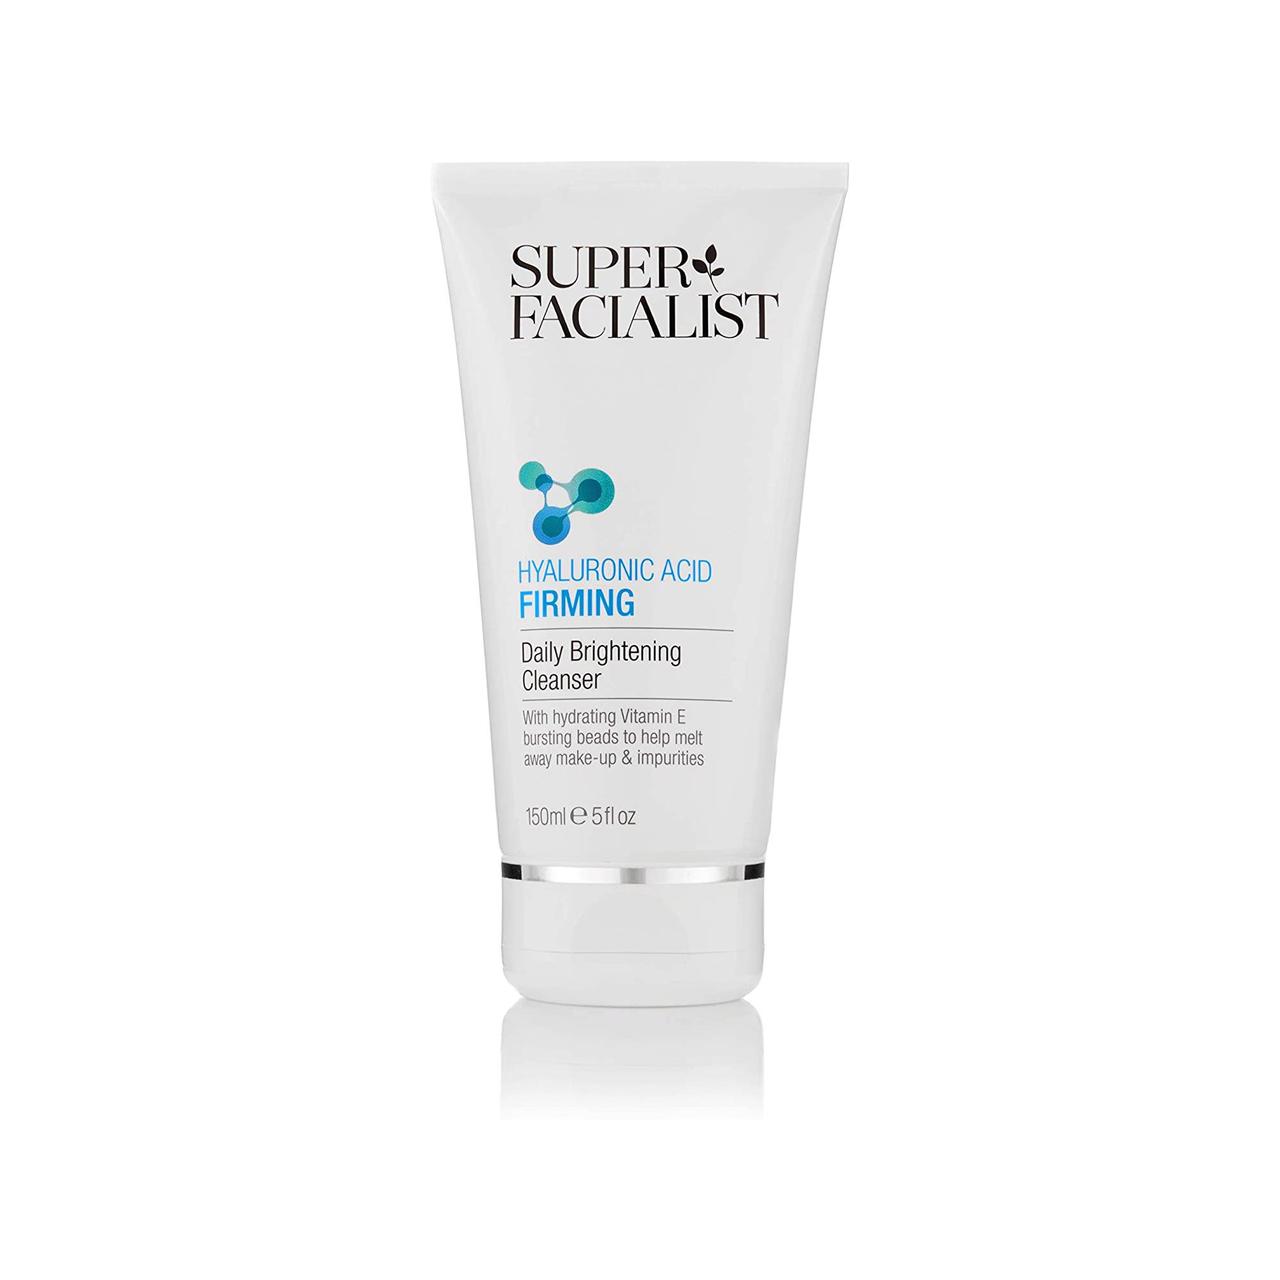 Super Facialist Hyaluronic Acid Daily Brightening Cleanser